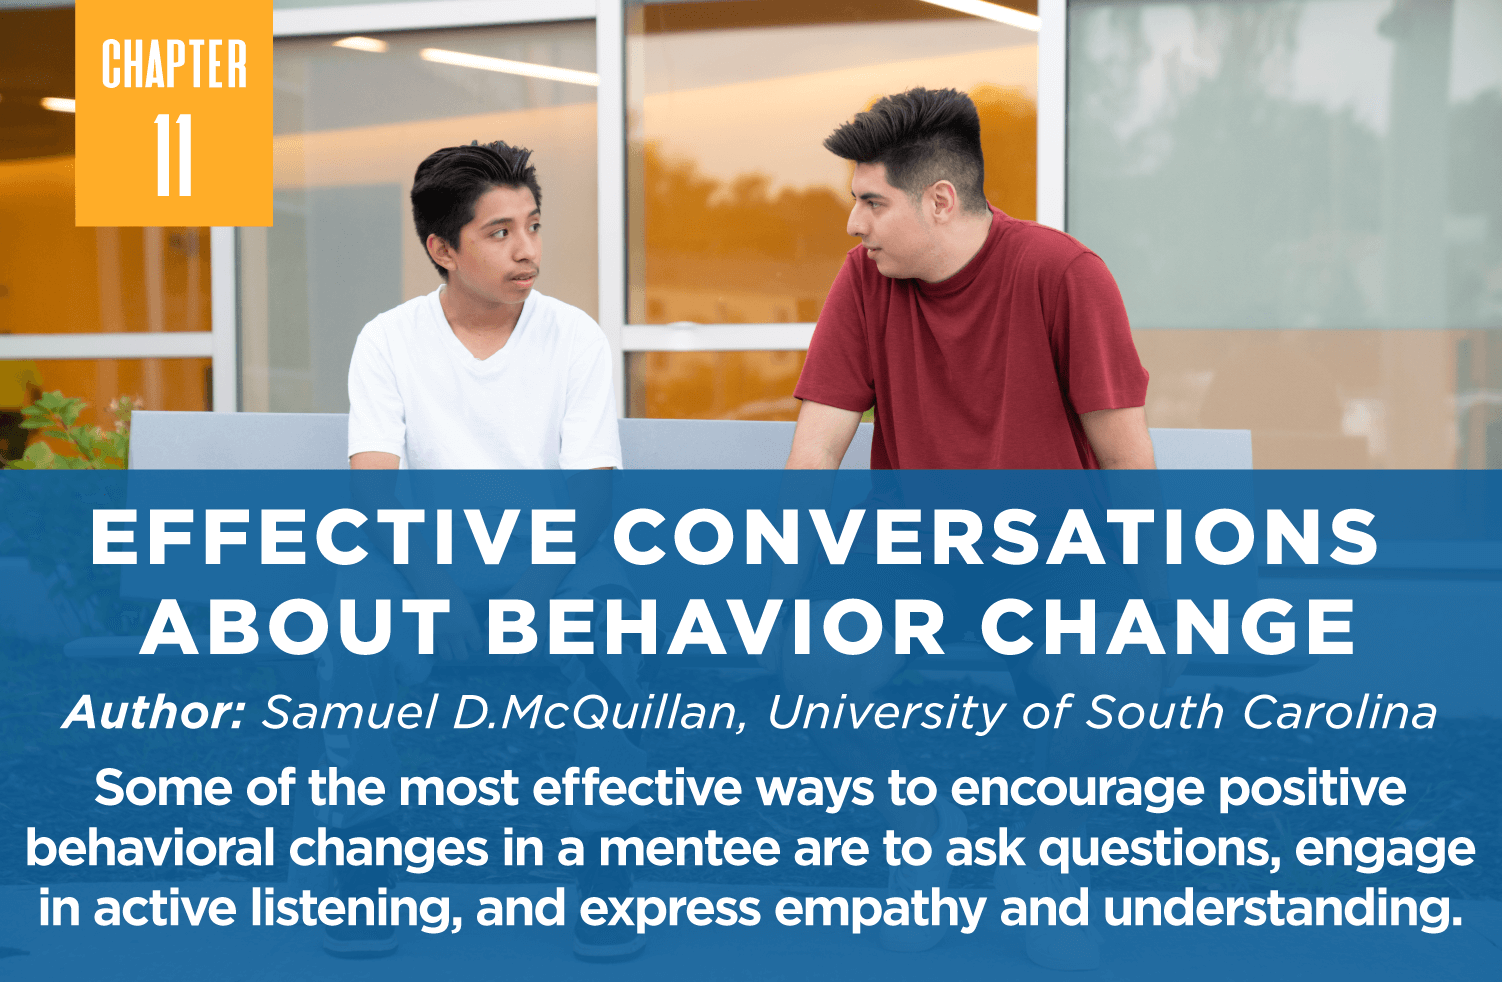 Effective Conversations 
about Behavior Change
Author: Samuel D.McQuillan, University of South Carolina
Some of the most effective ways to encourage positive behavioral changes in a mentee are to ask questions, engage in active listening, and express empathy and understanding.